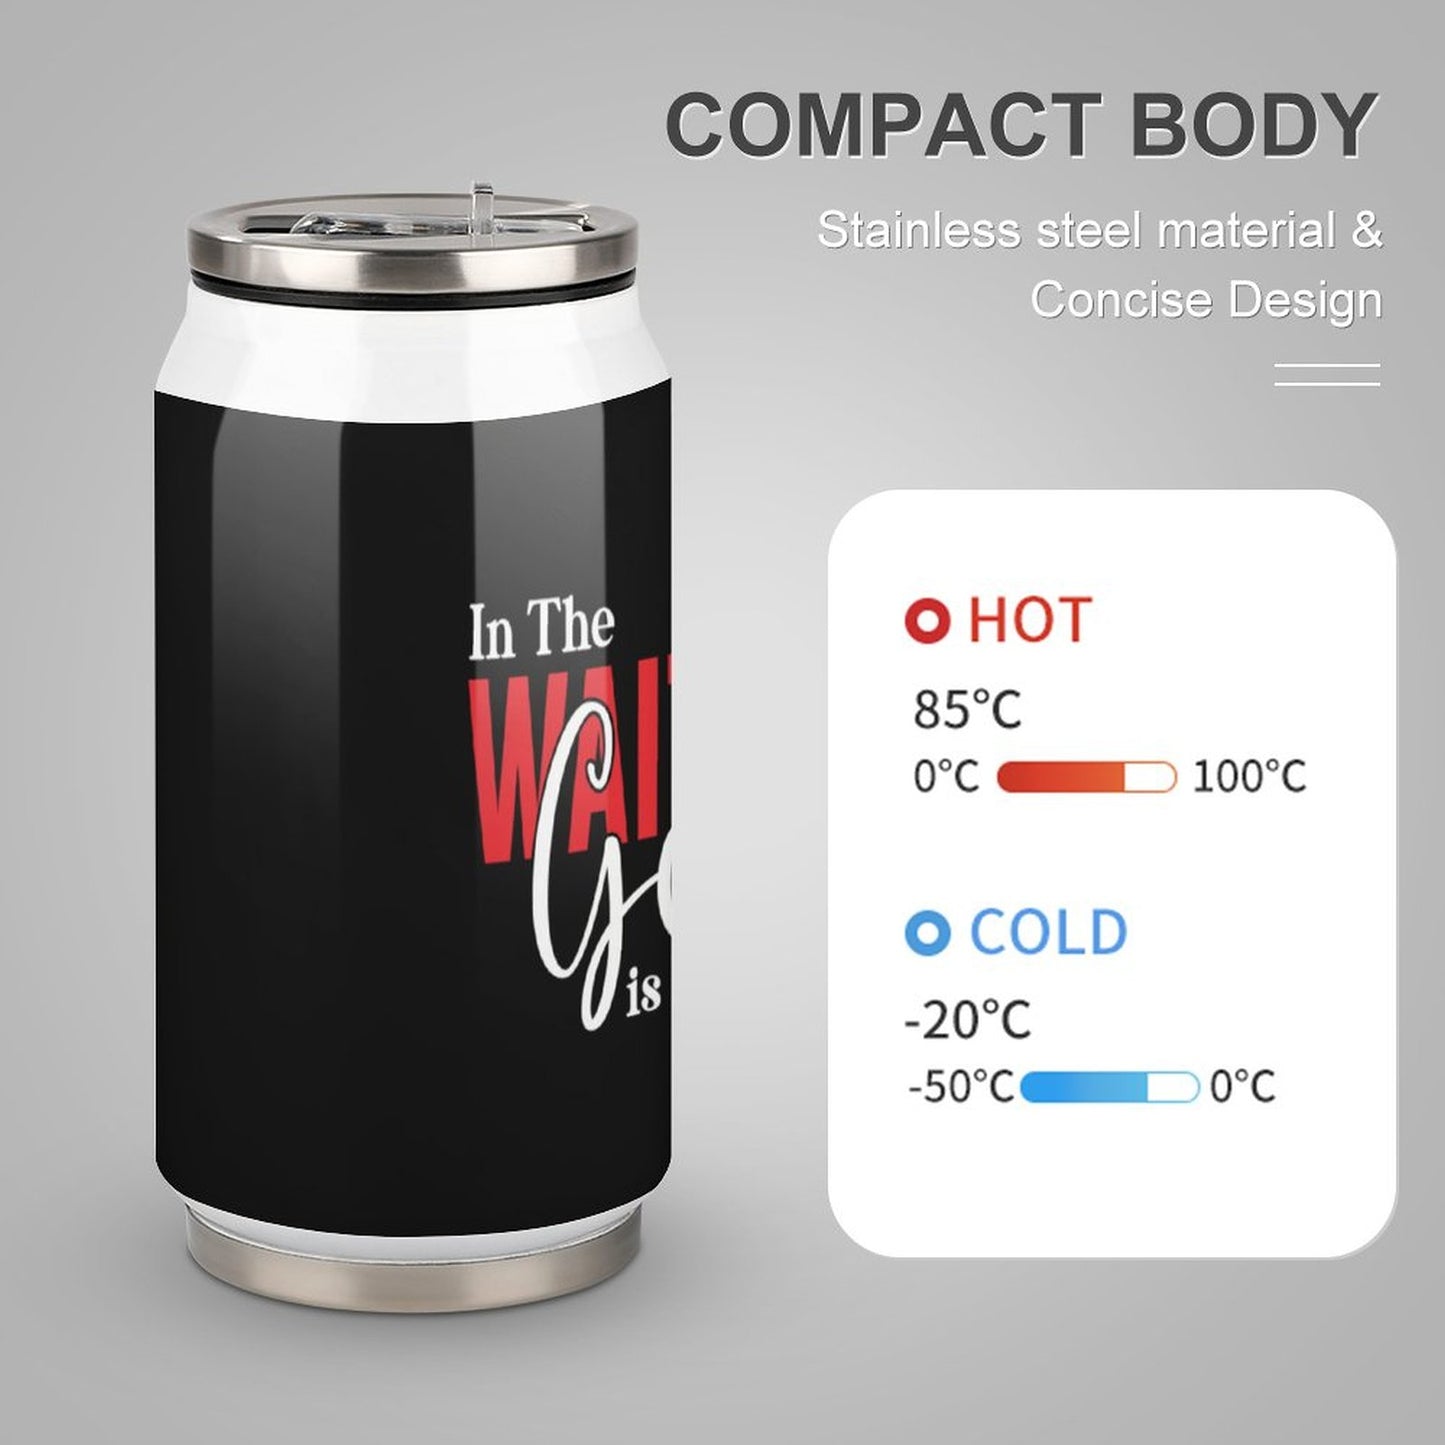 In The Waiting God Is Working Christian Stainless Steel Tumbler with Straw SALE-Personal Design